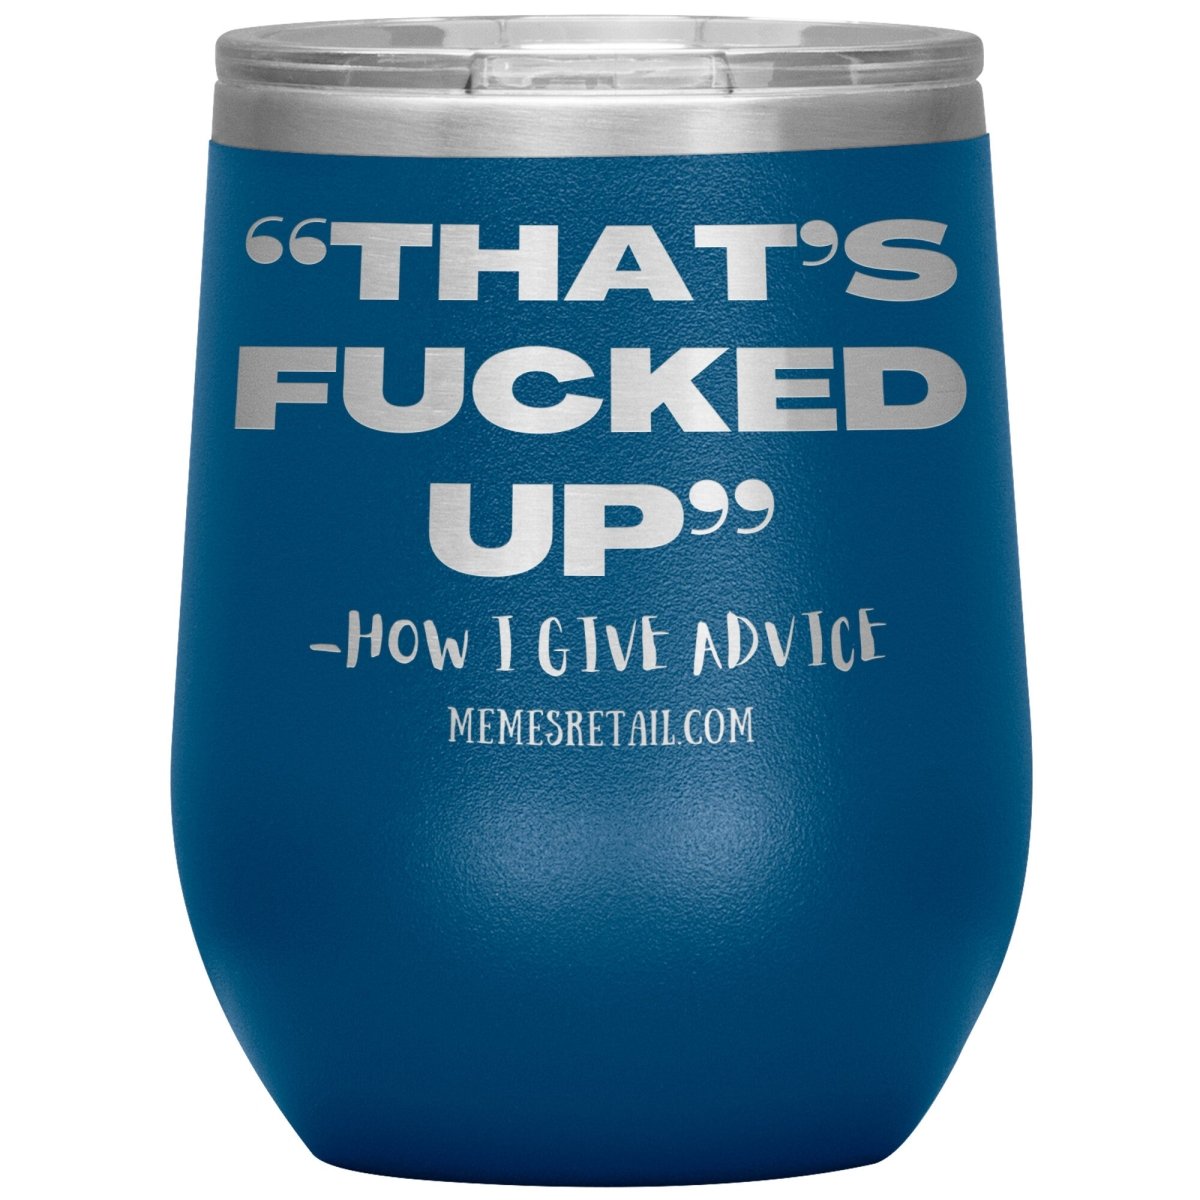 “That’s Fucked Up” -how I give advice Tumblers, 12oz Wine Insulated Tumbler / Blue - MemesRetail.com